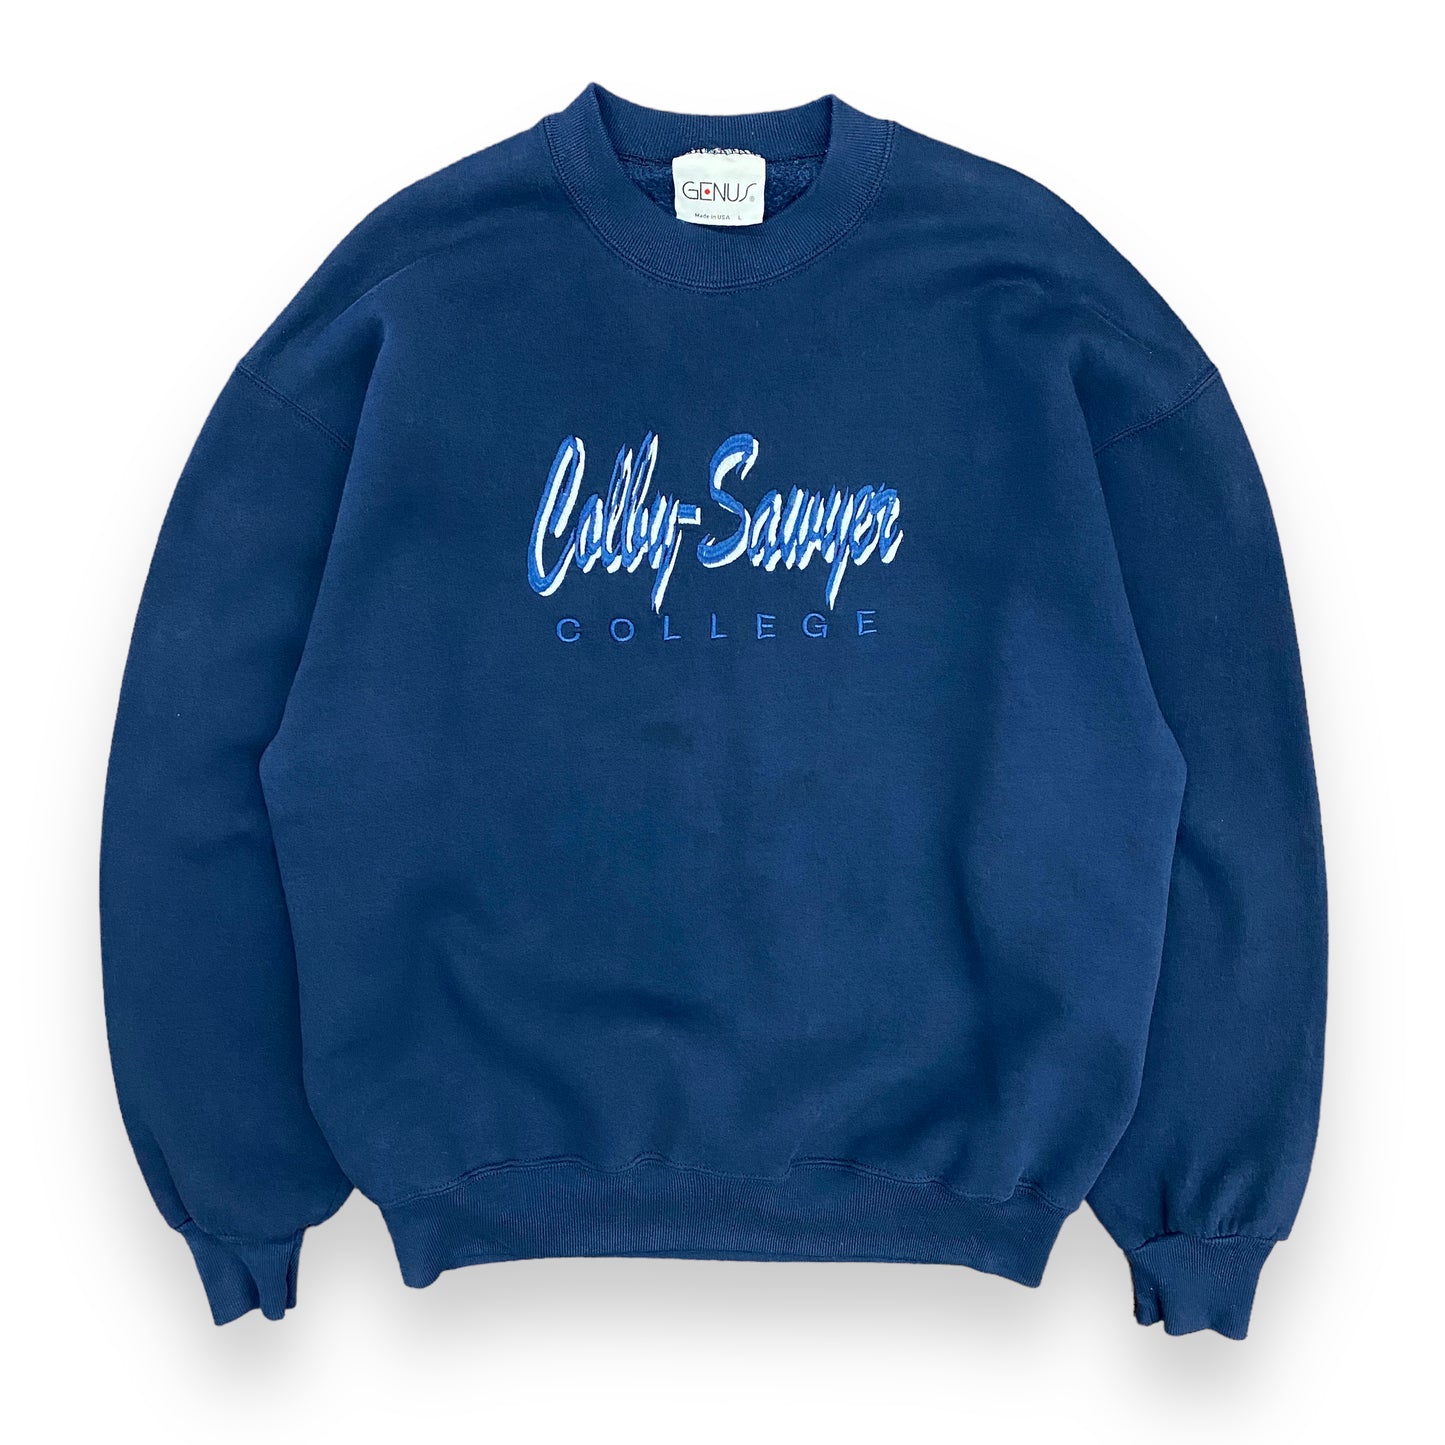 Vintage 90s Colby-Sawyer College Embroidered Sweatshirt - Size Large